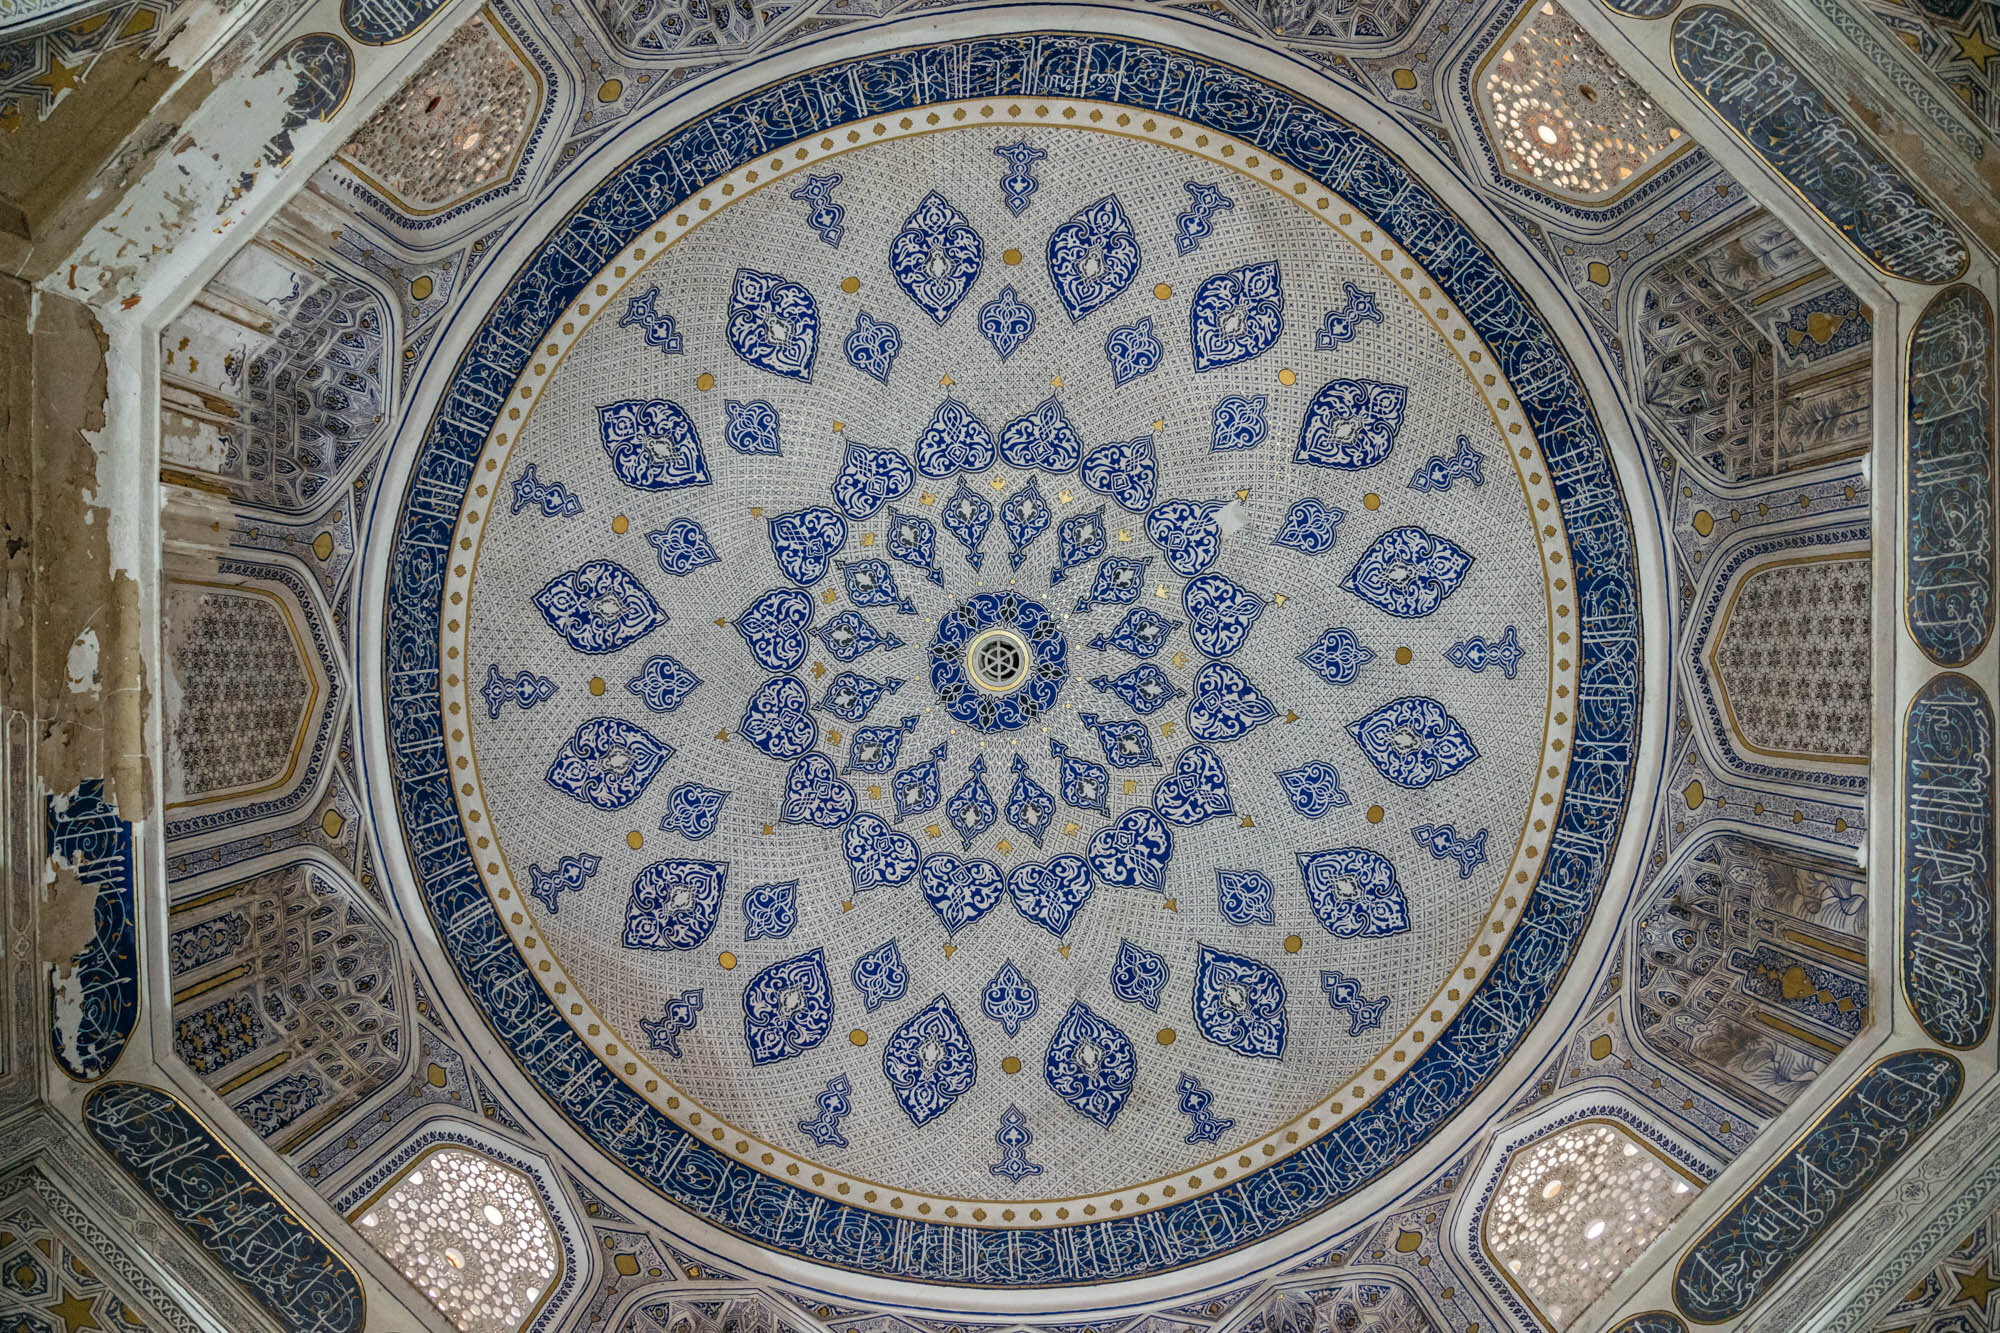  Ceiling details from the Shah-i-Zinda tomb complex, Samarkand 